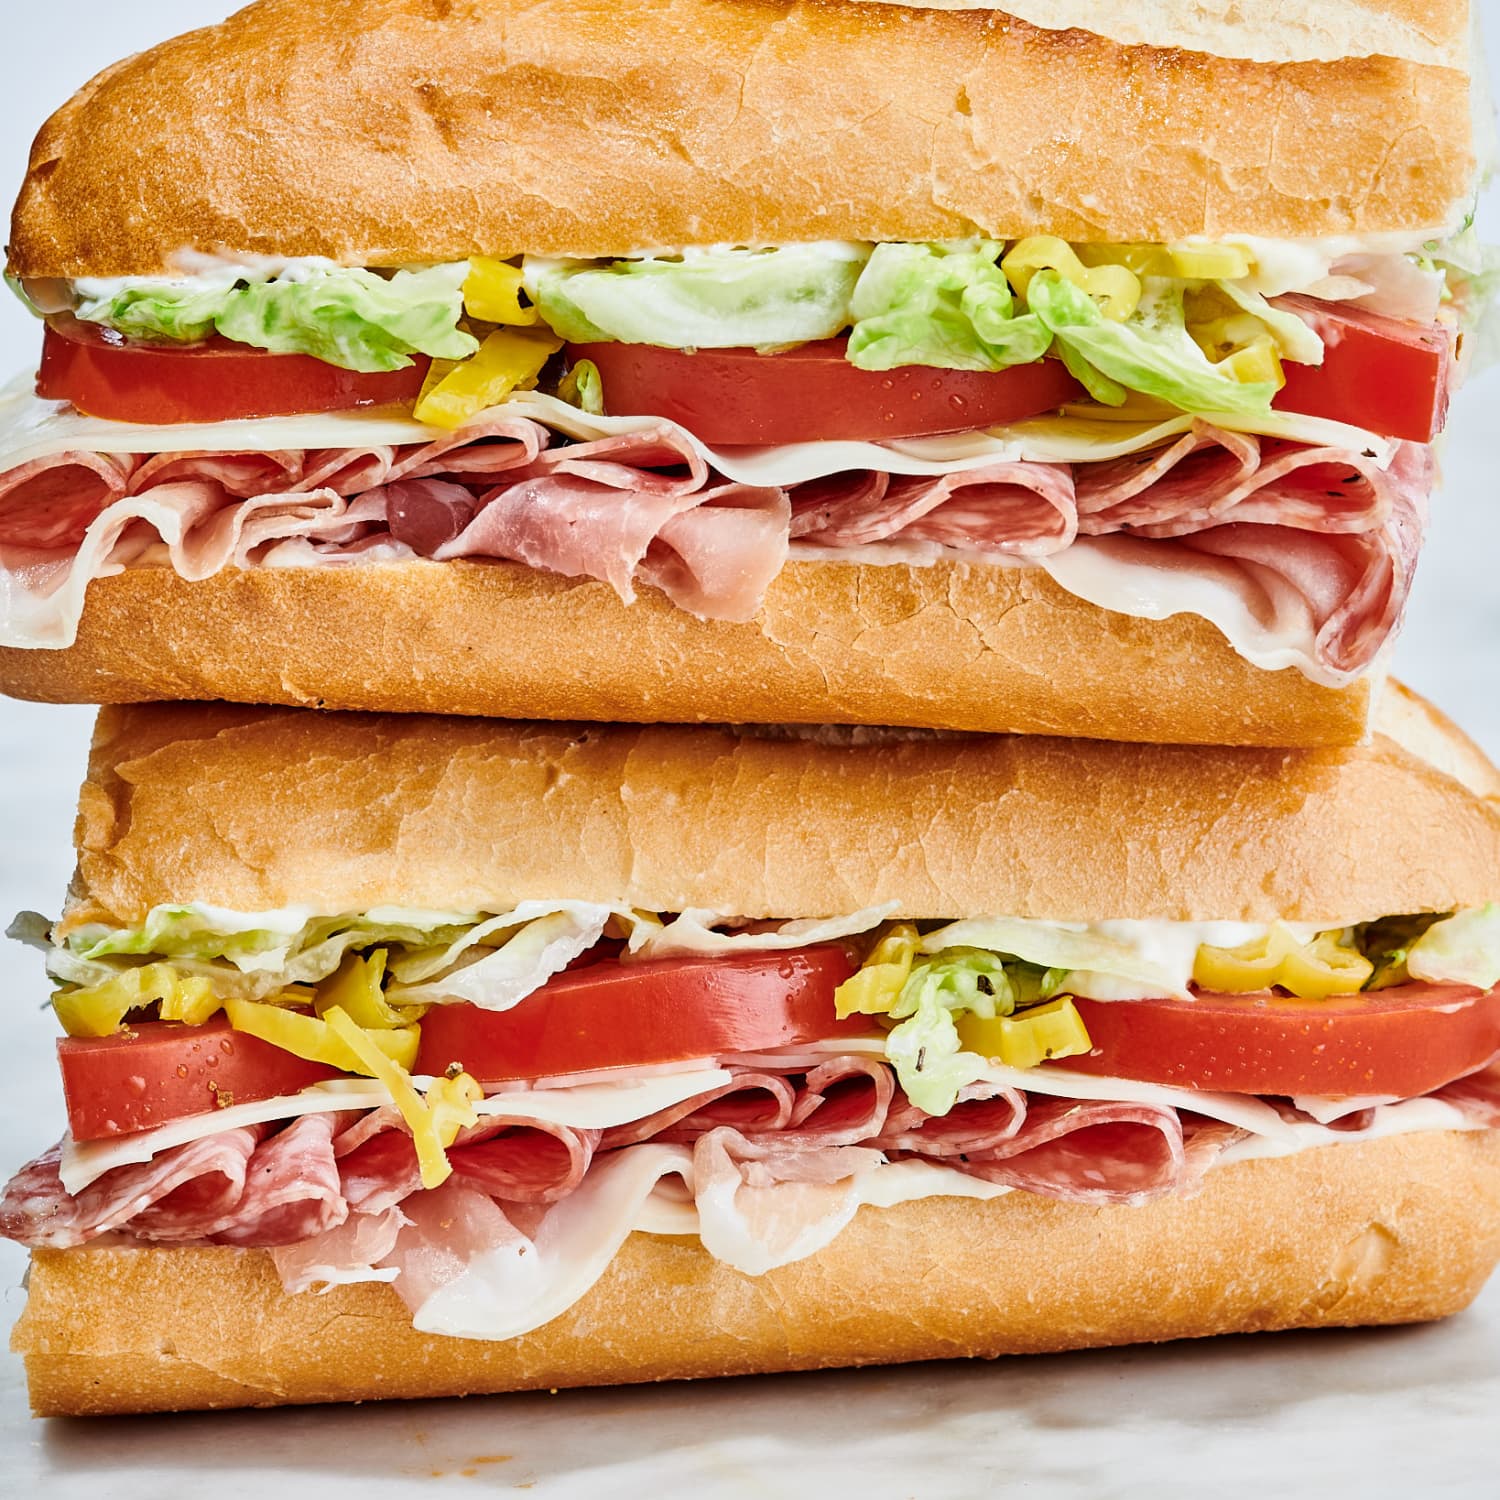 What is a real Italian sandwich?